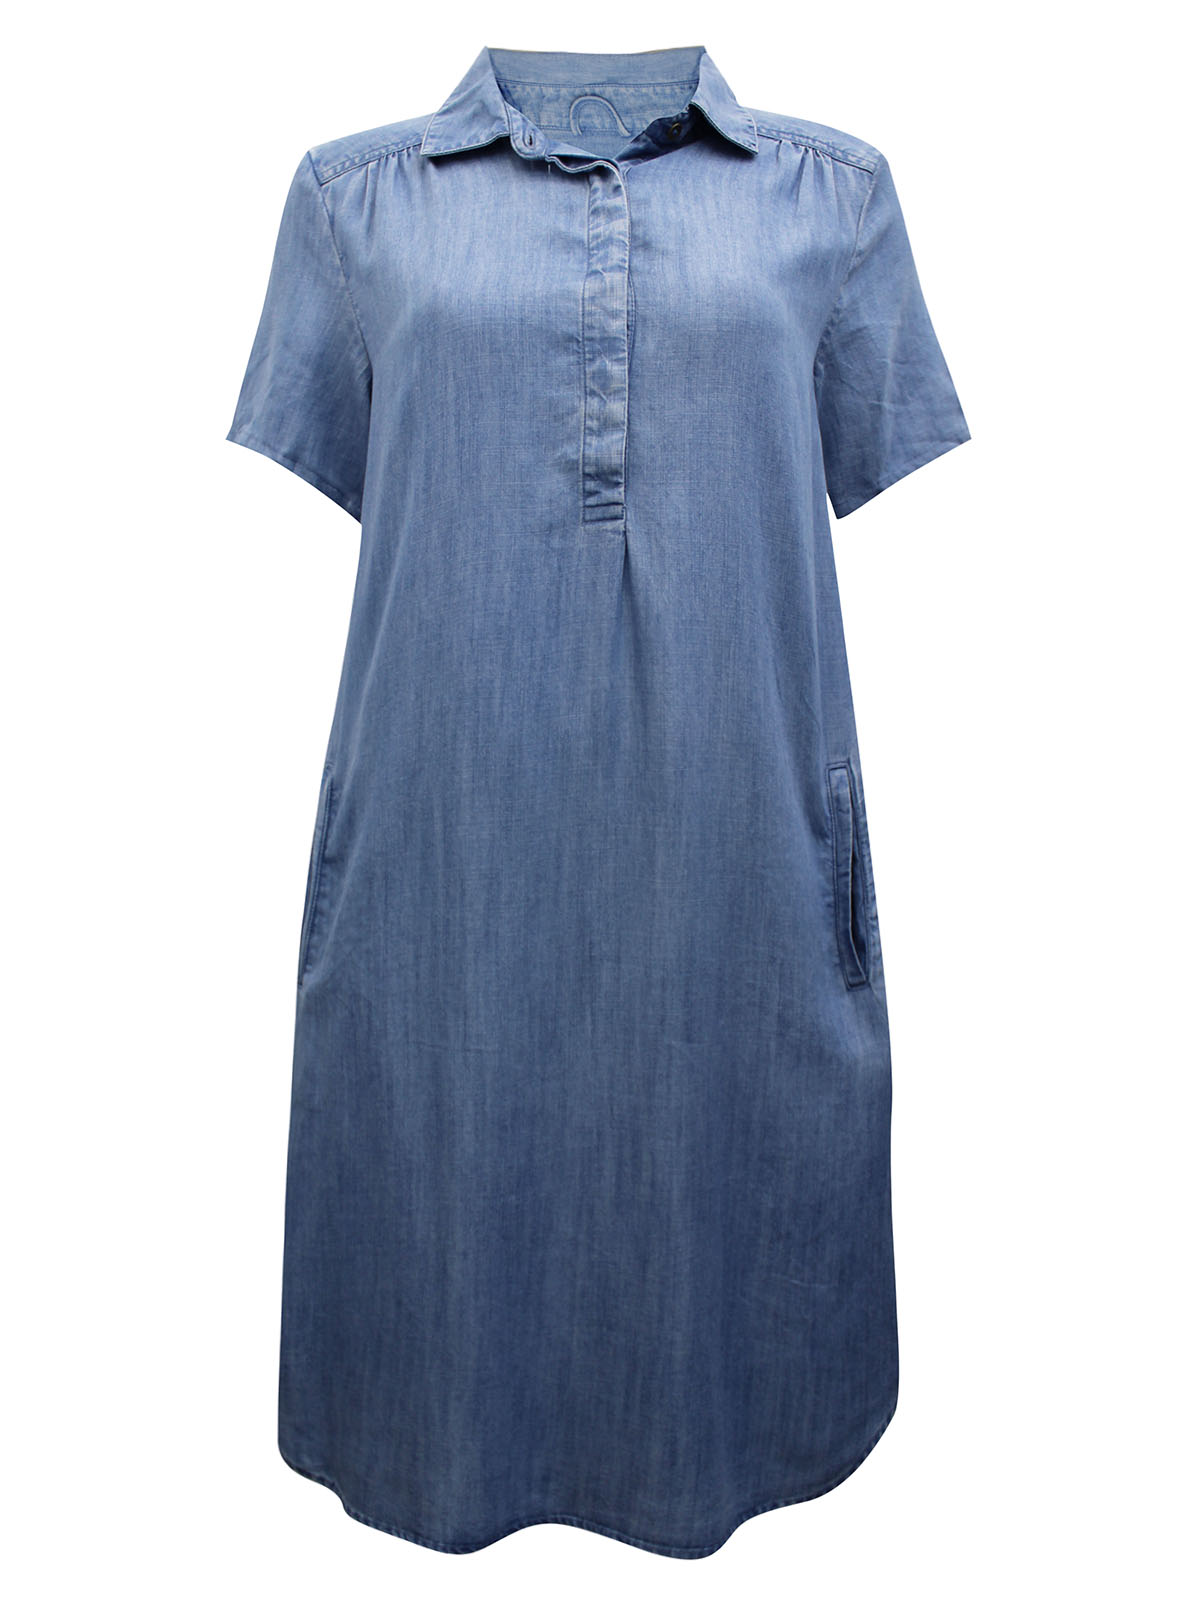 FAT FACE - - Fat Face ASSORTED Denim Dresses - Size 12 to 14